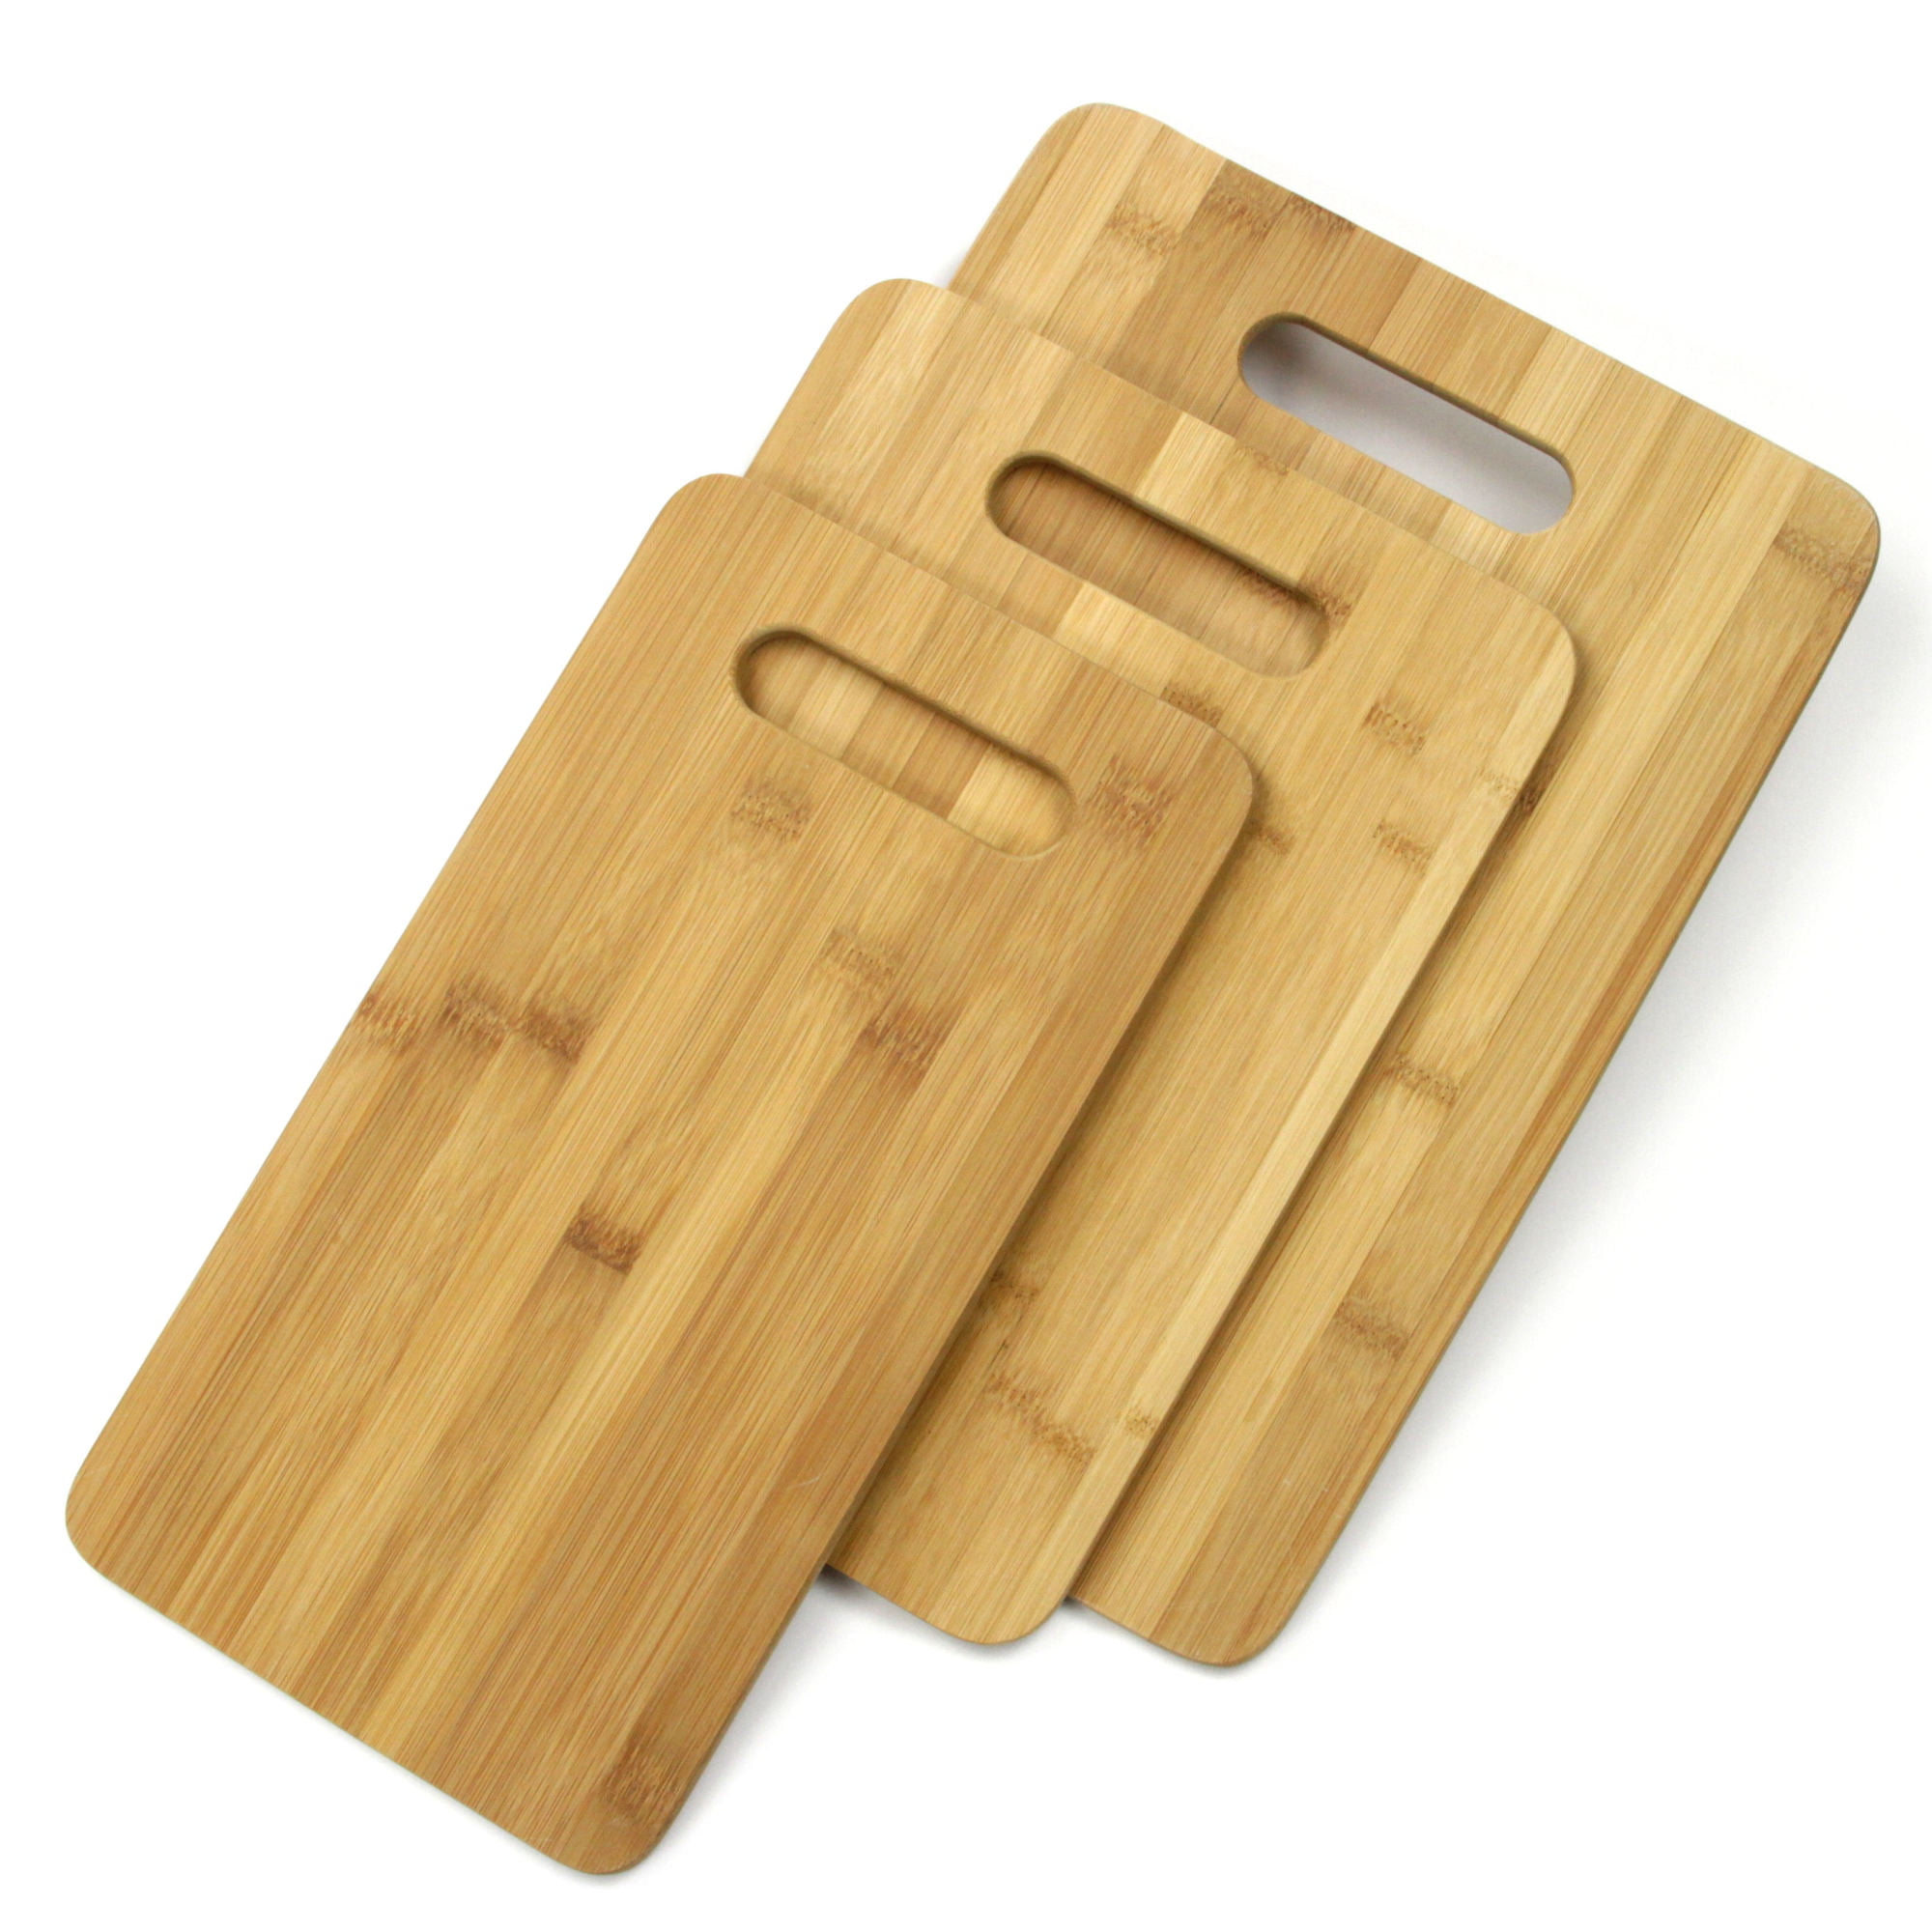 Classic Cuisine Extra Large Bamboo Cutting Board Eco Friendly and Antibacterial  Chopping and Serving Board with Juice Groove 20 x 14